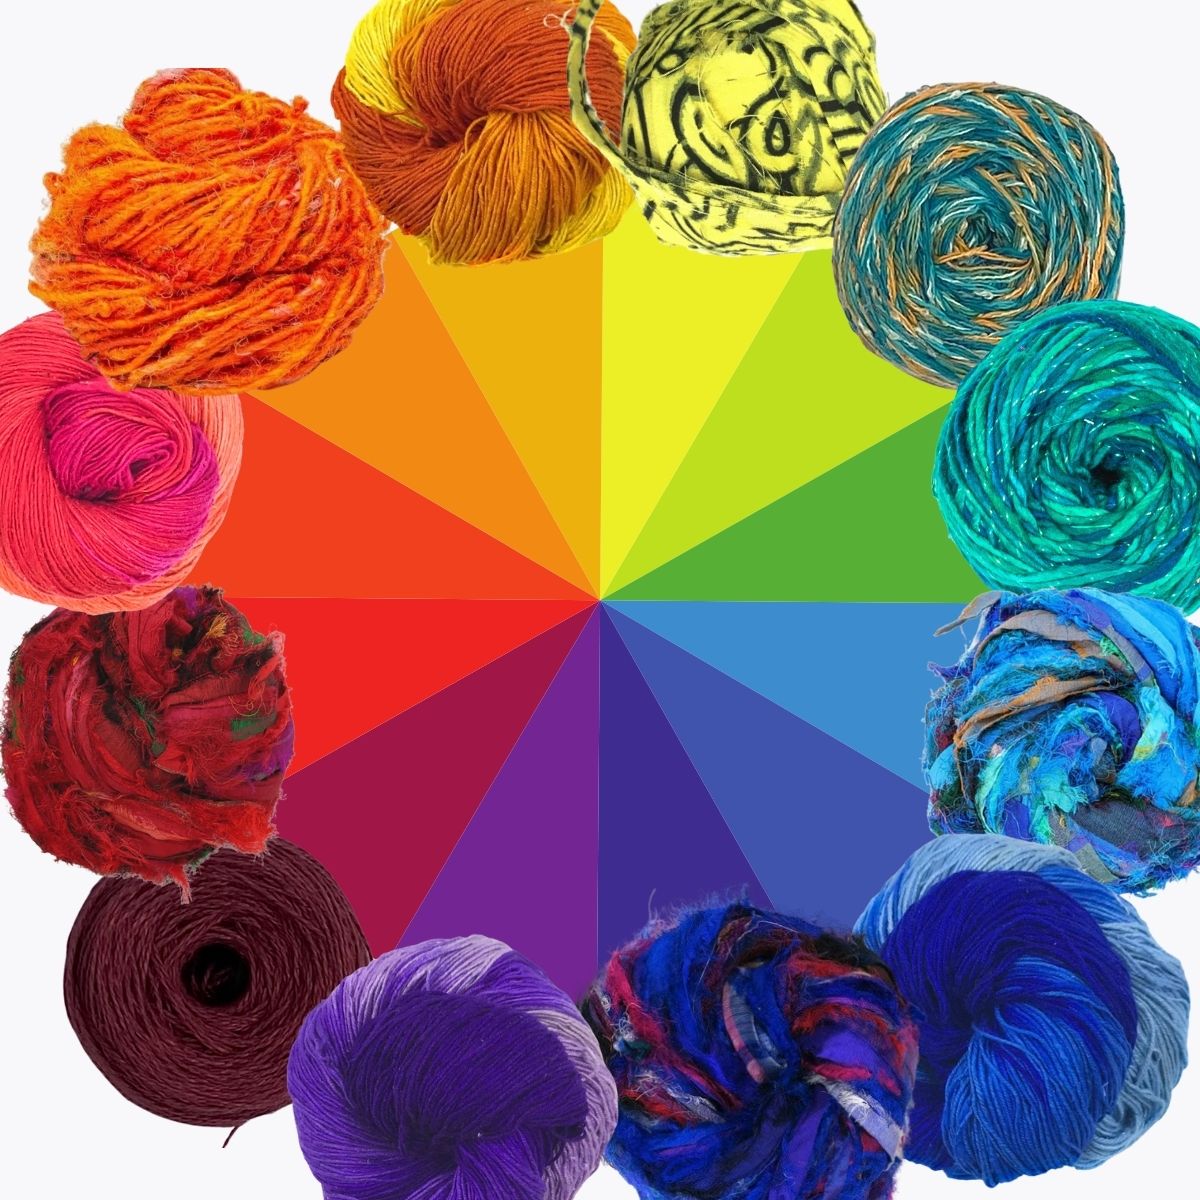 Lion Brand Yarn- Free Color Charts - A Crafty Concept  Lion brand yarn,  Knitting yarn colors, Yarn color combinations